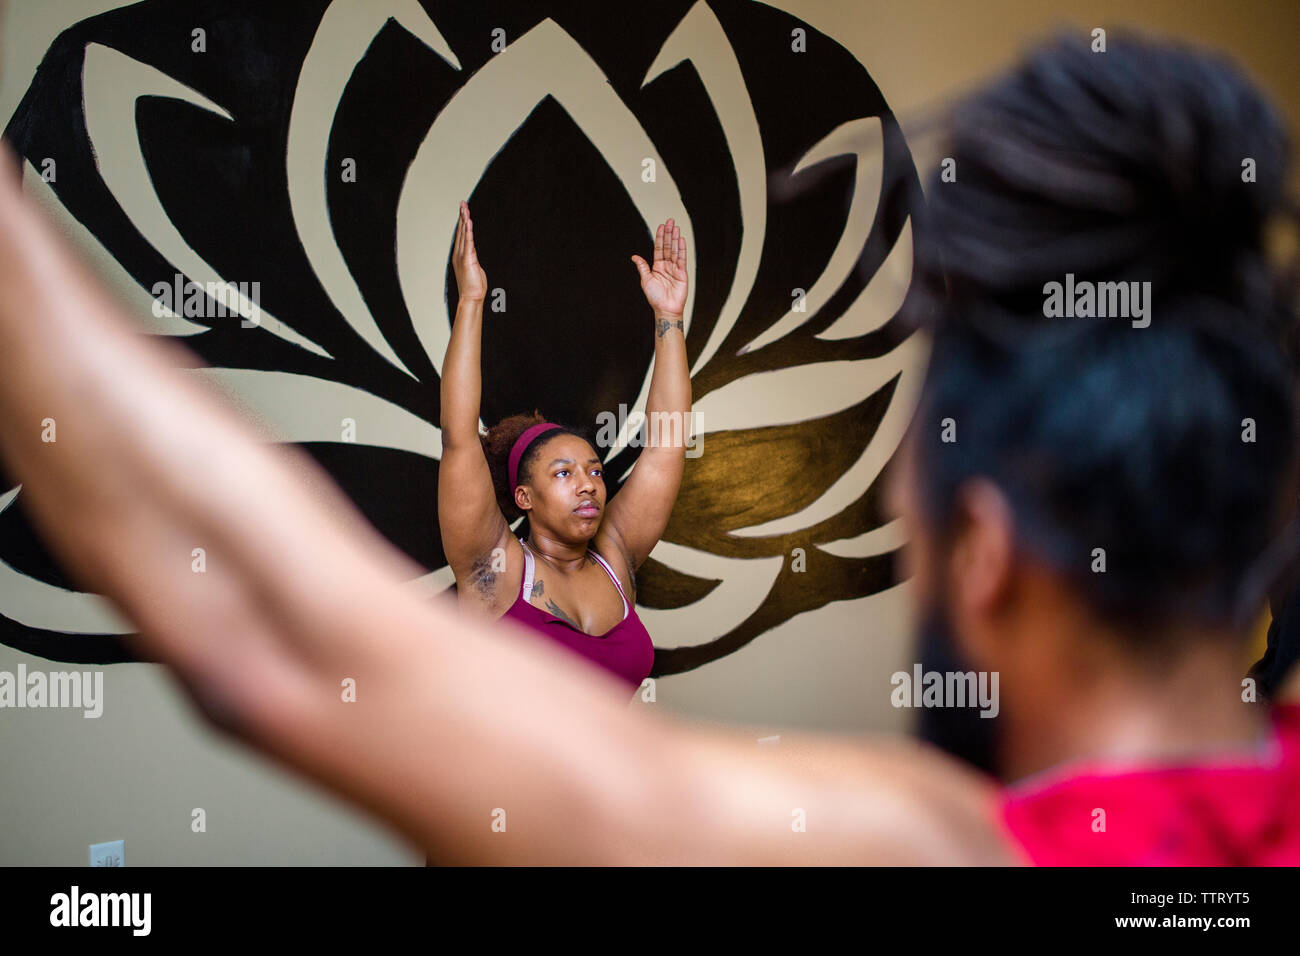 A woman in a yoga class stretches her arms up in a yoga pose Stock Photo